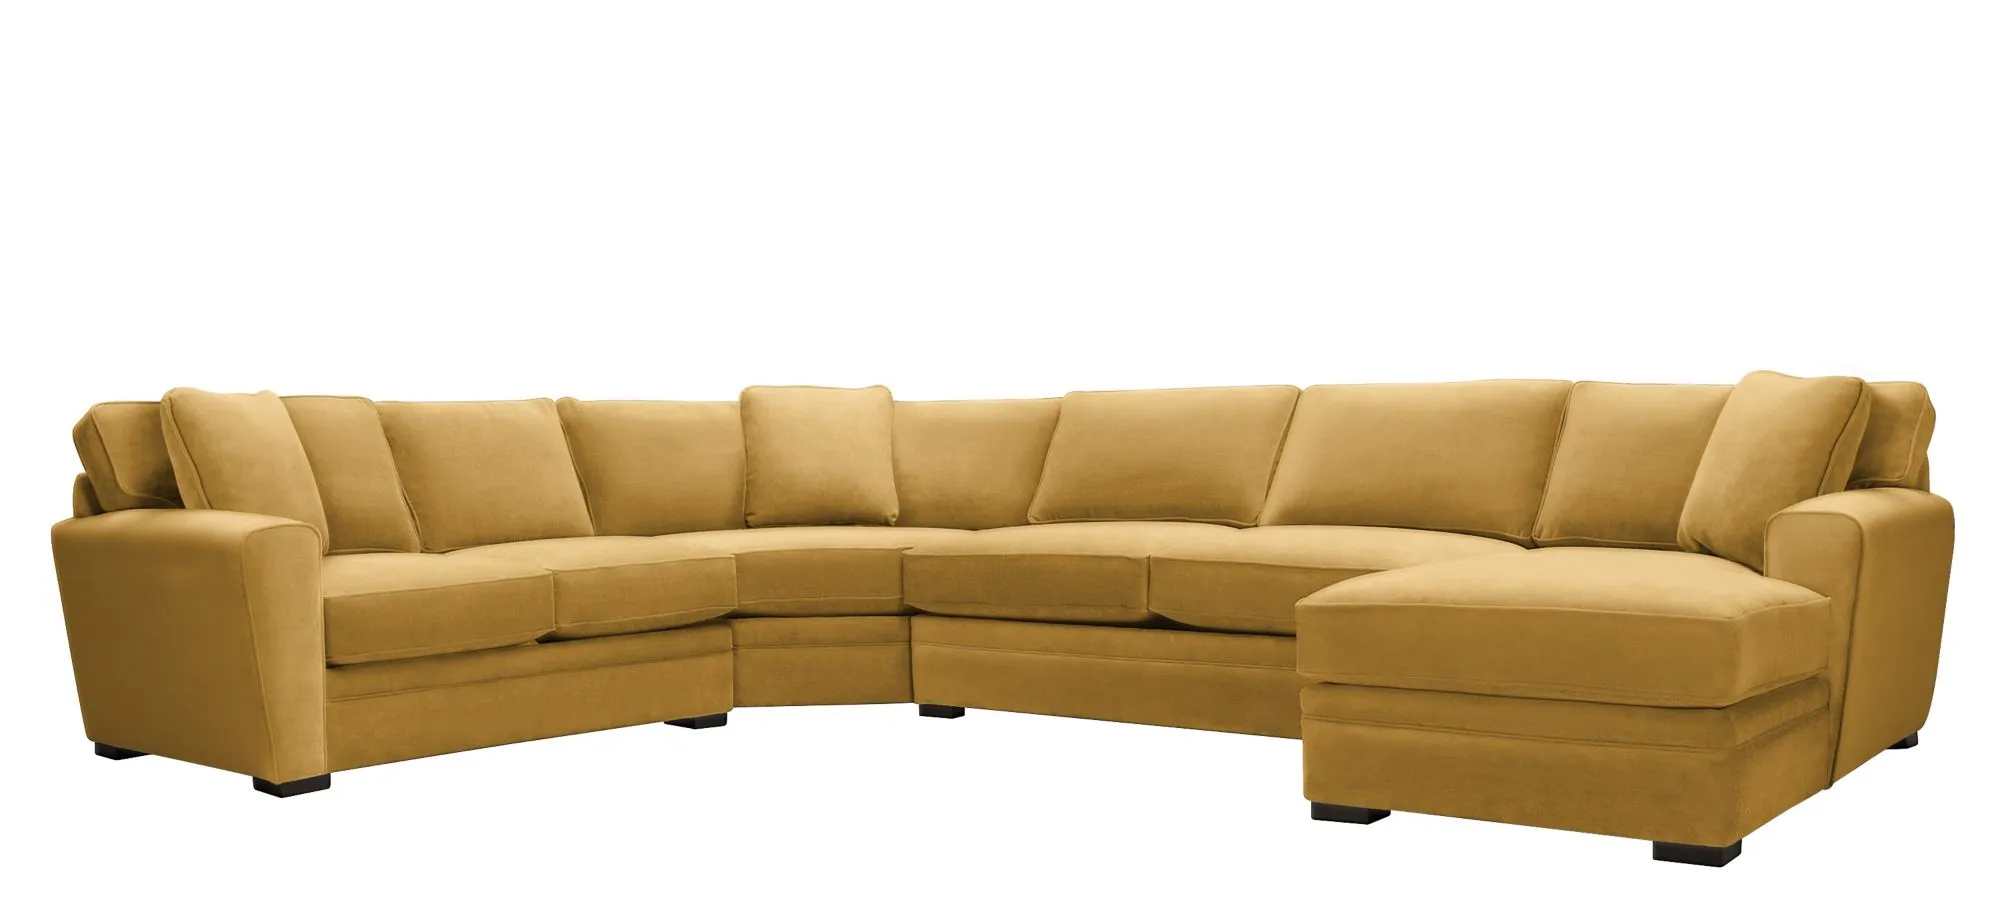 Artemis II 4-pc. Right Hand Facing Sectional Sofa in Gypsy Arrow by Jonathan Louis